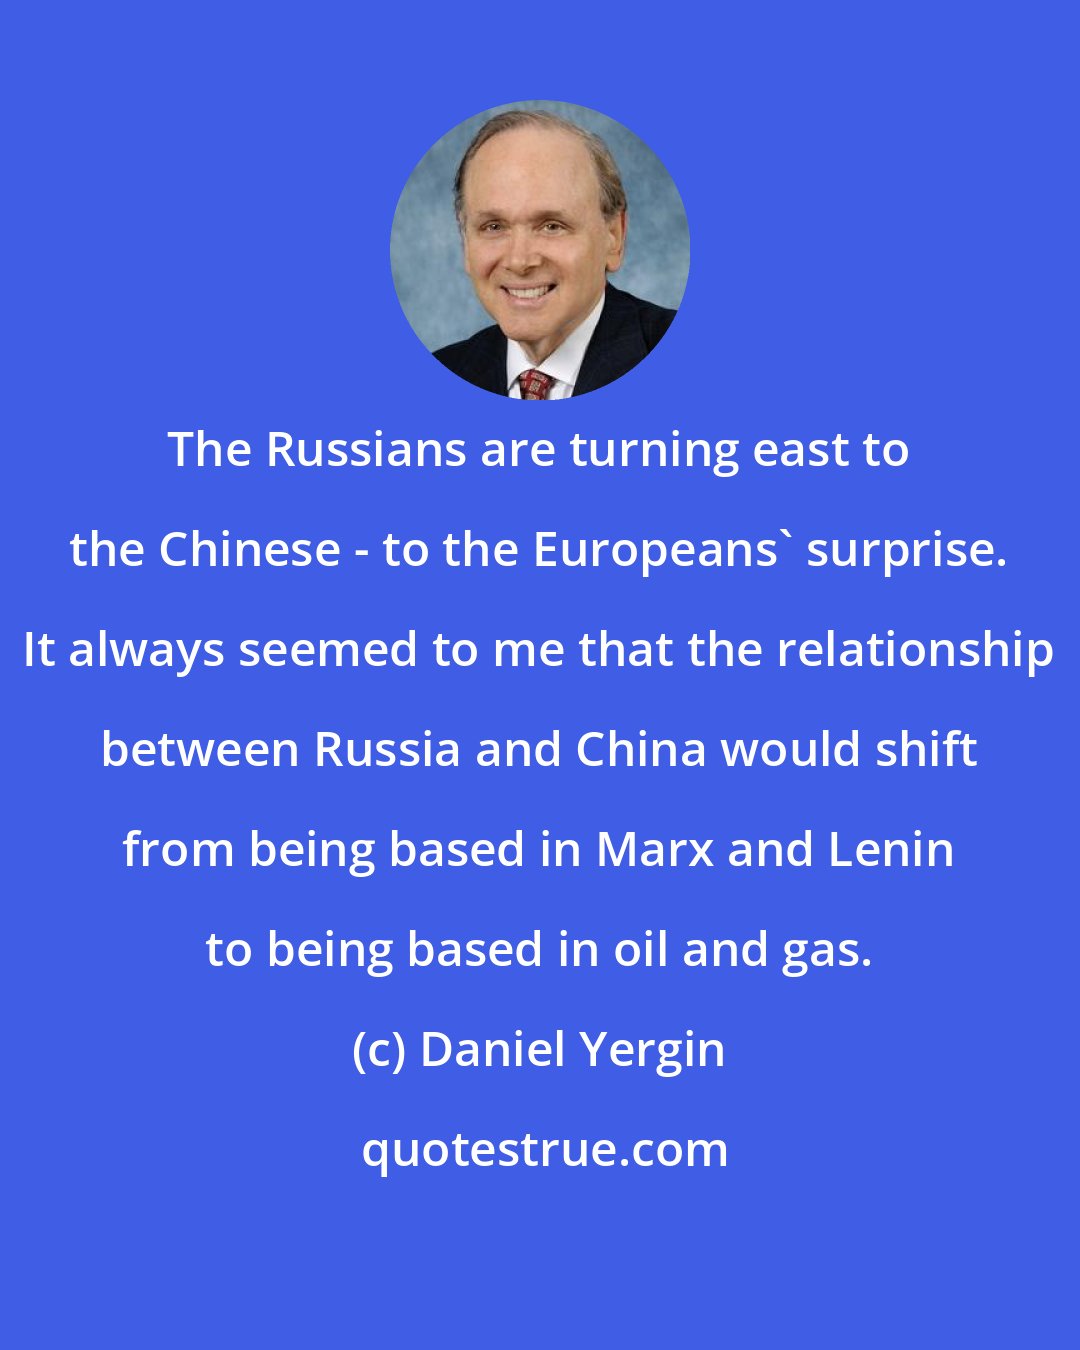 Daniel Yergin: The Russians are turning east to the Chinese - to the Europeans' surprise. It always seemed to me that the relationship between Russia and China would shift from being based in Marx and Lenin to being based in oil and gas.